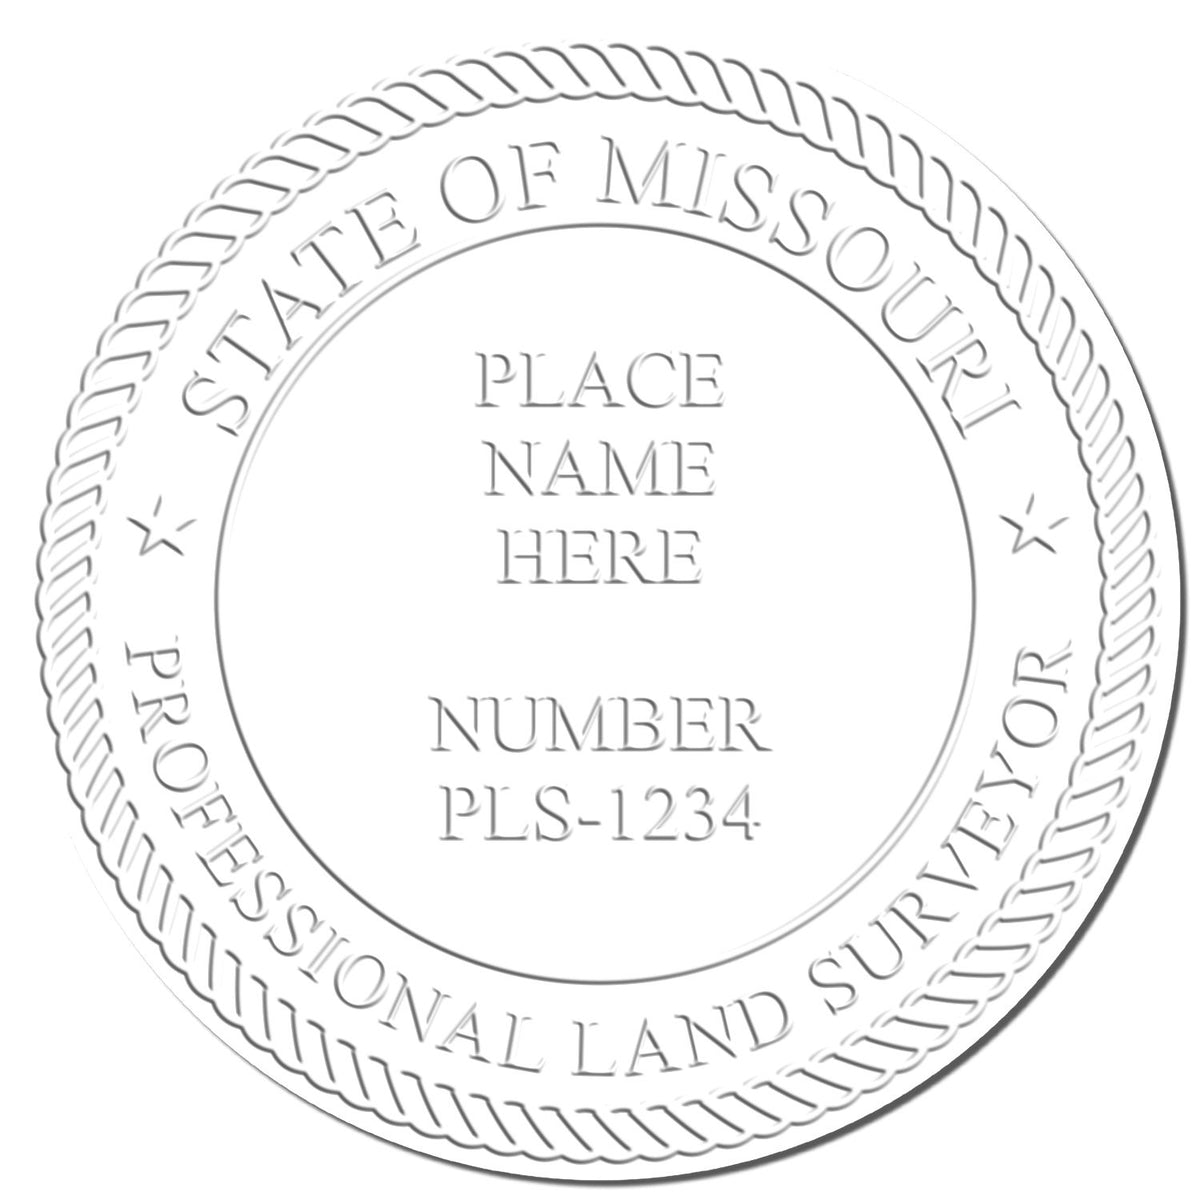 This paper is stamped with a sample imprint of the Hybrid Missouri Land Surveyor Seal, signifying its quality and reliability.